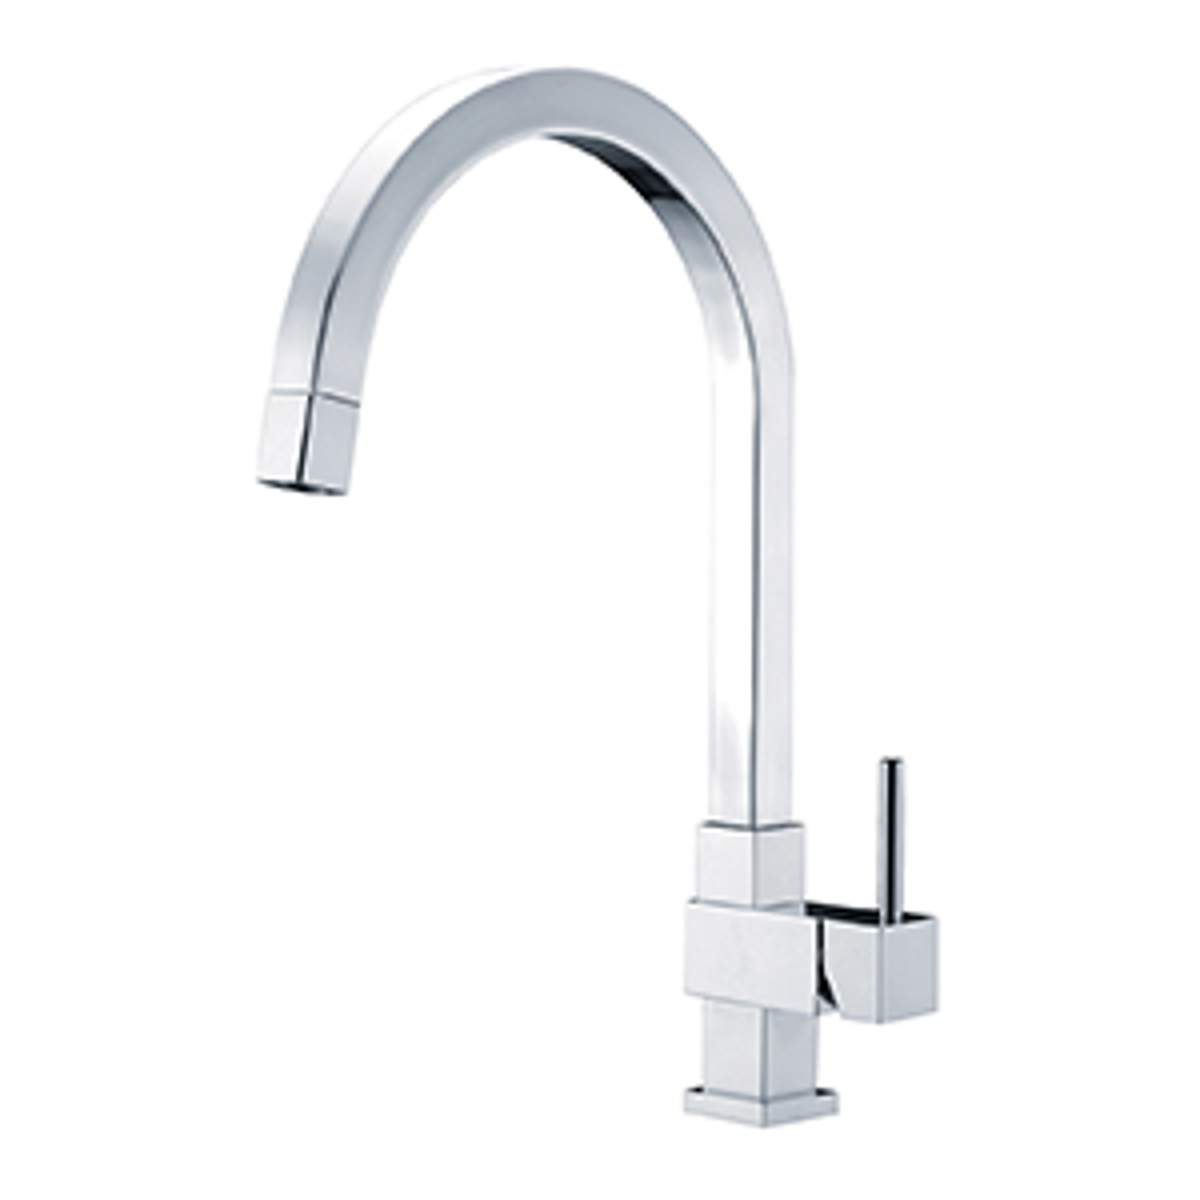 JTP Kubix Pull-Out Single Lever Sink Mixer with Swivel Spout (KP181)